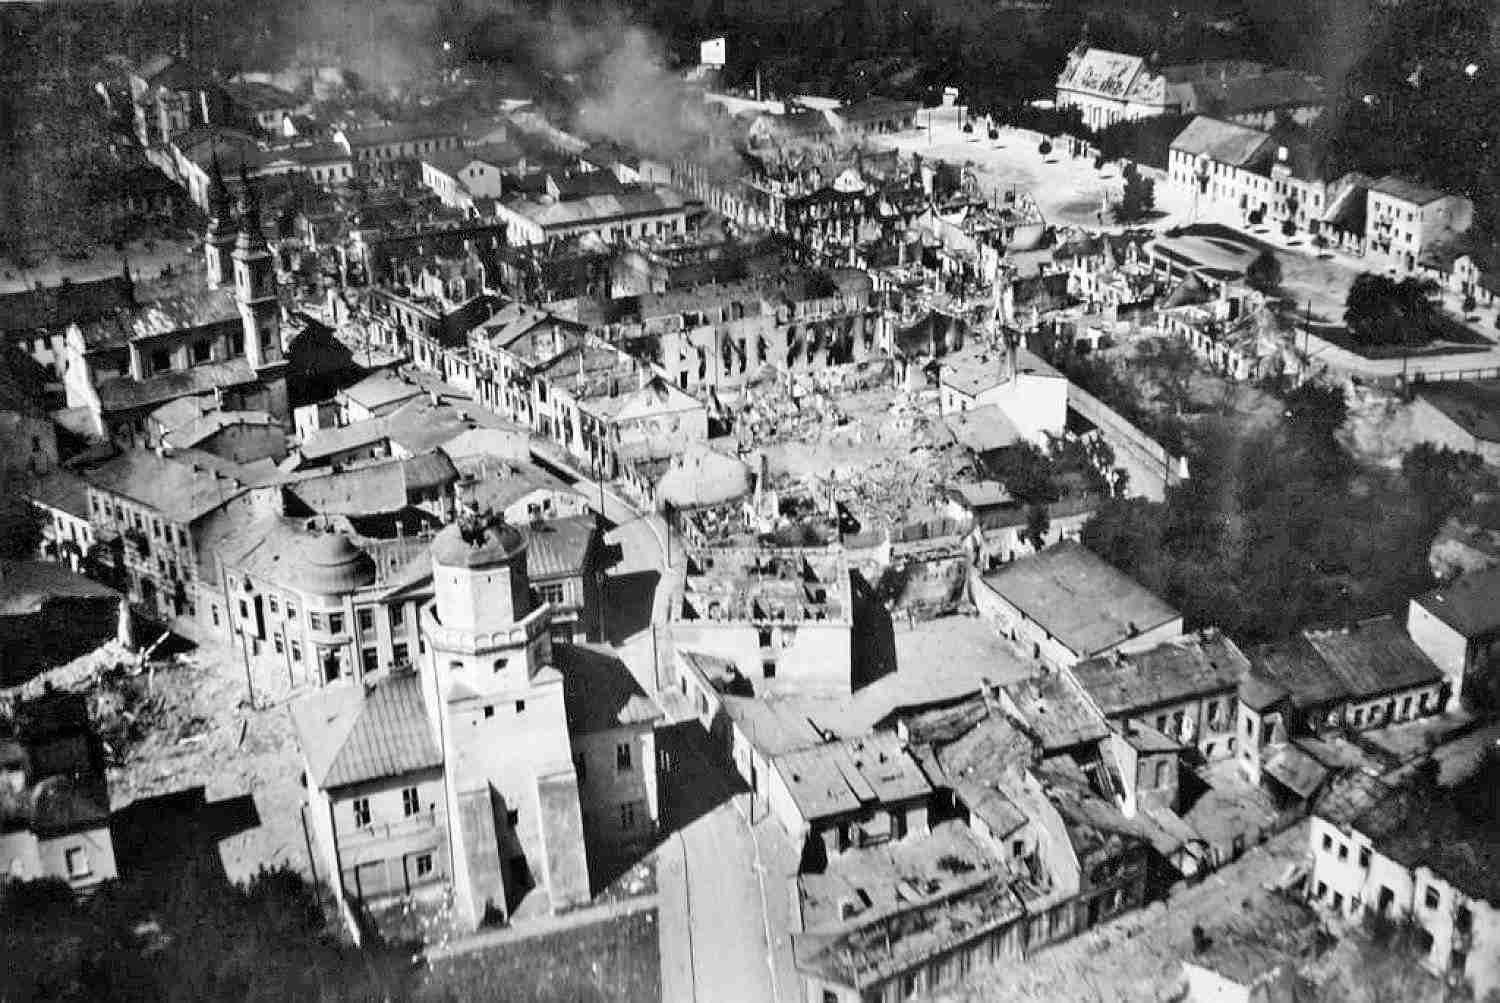 Aerial view of Wieluń, Poland shortly after German Luftwaffe bombing on 1 September 1939. [1500x1003]